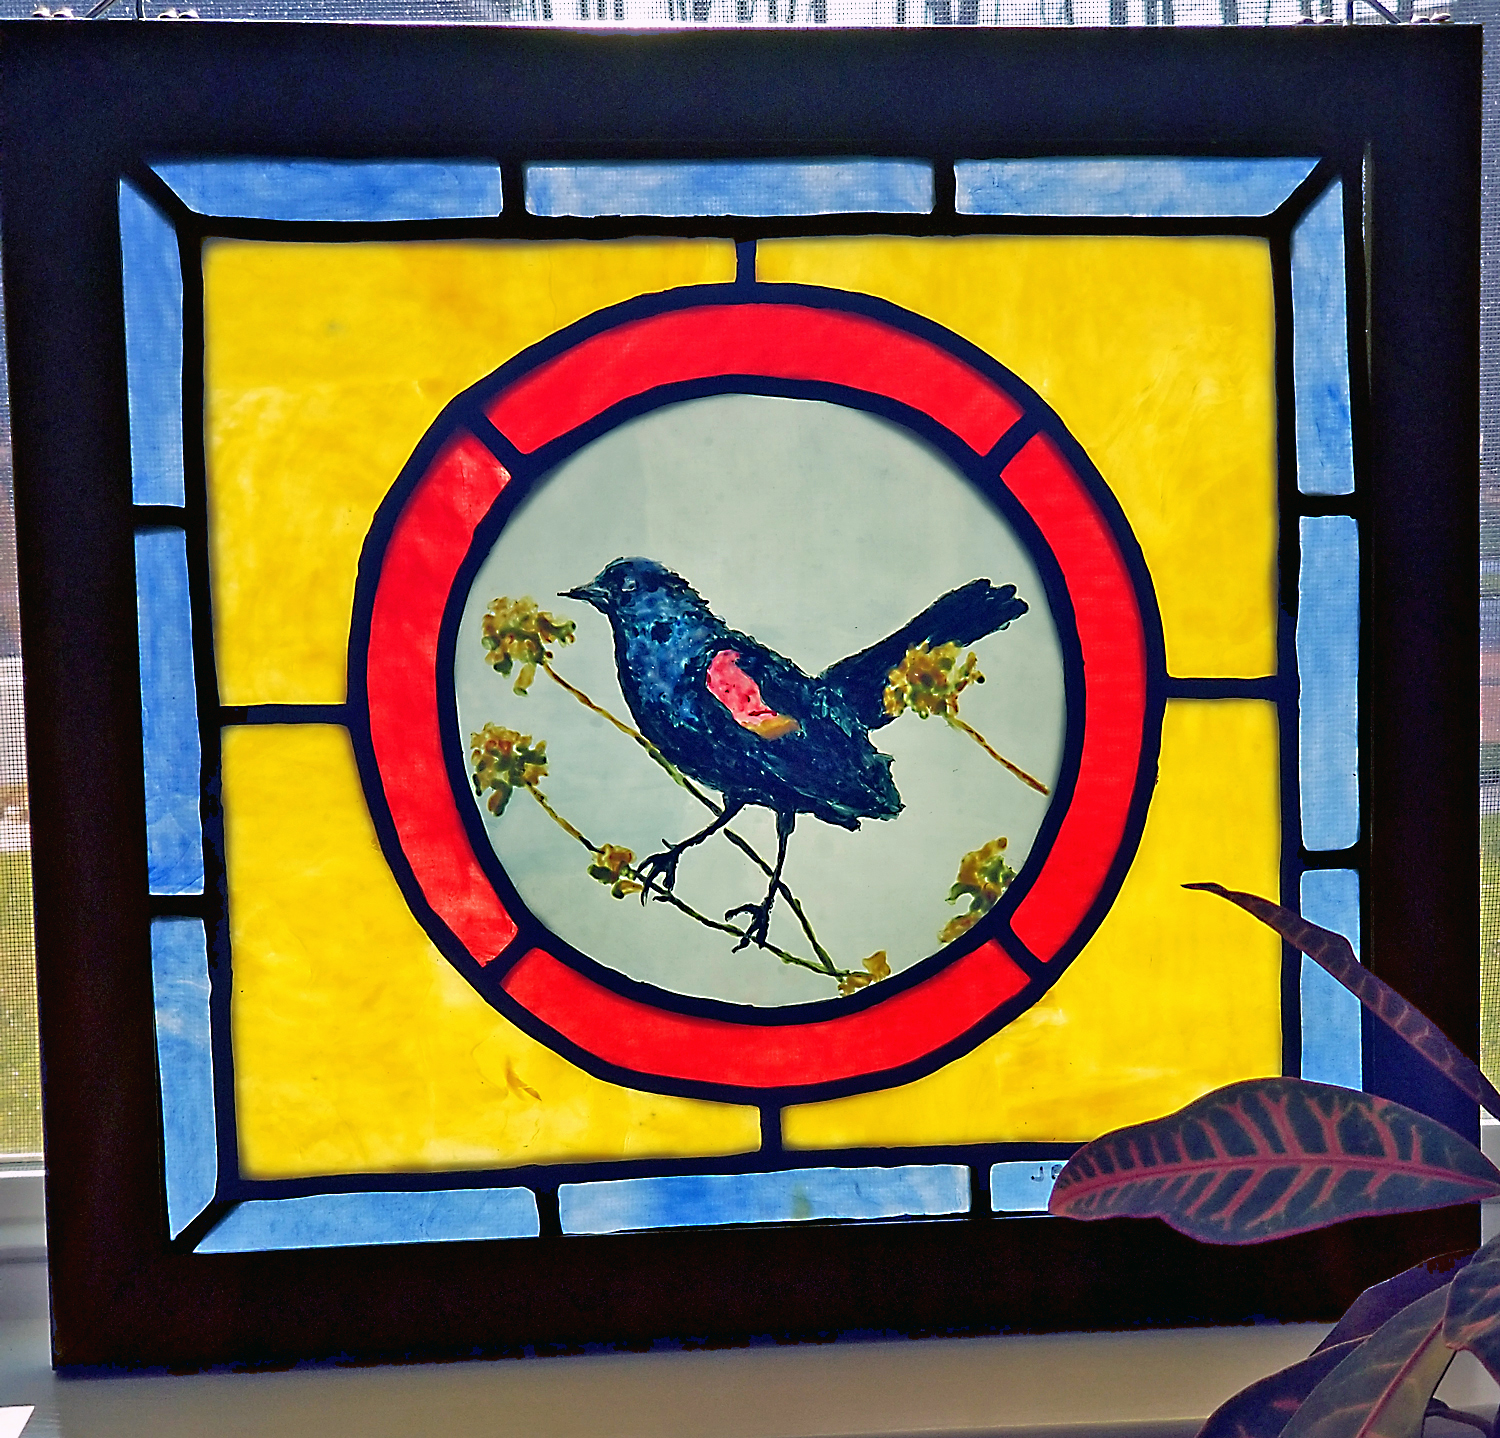 Redwinged Blackbird
Polymer clay, faux stained glass
15″ x 17″
$750